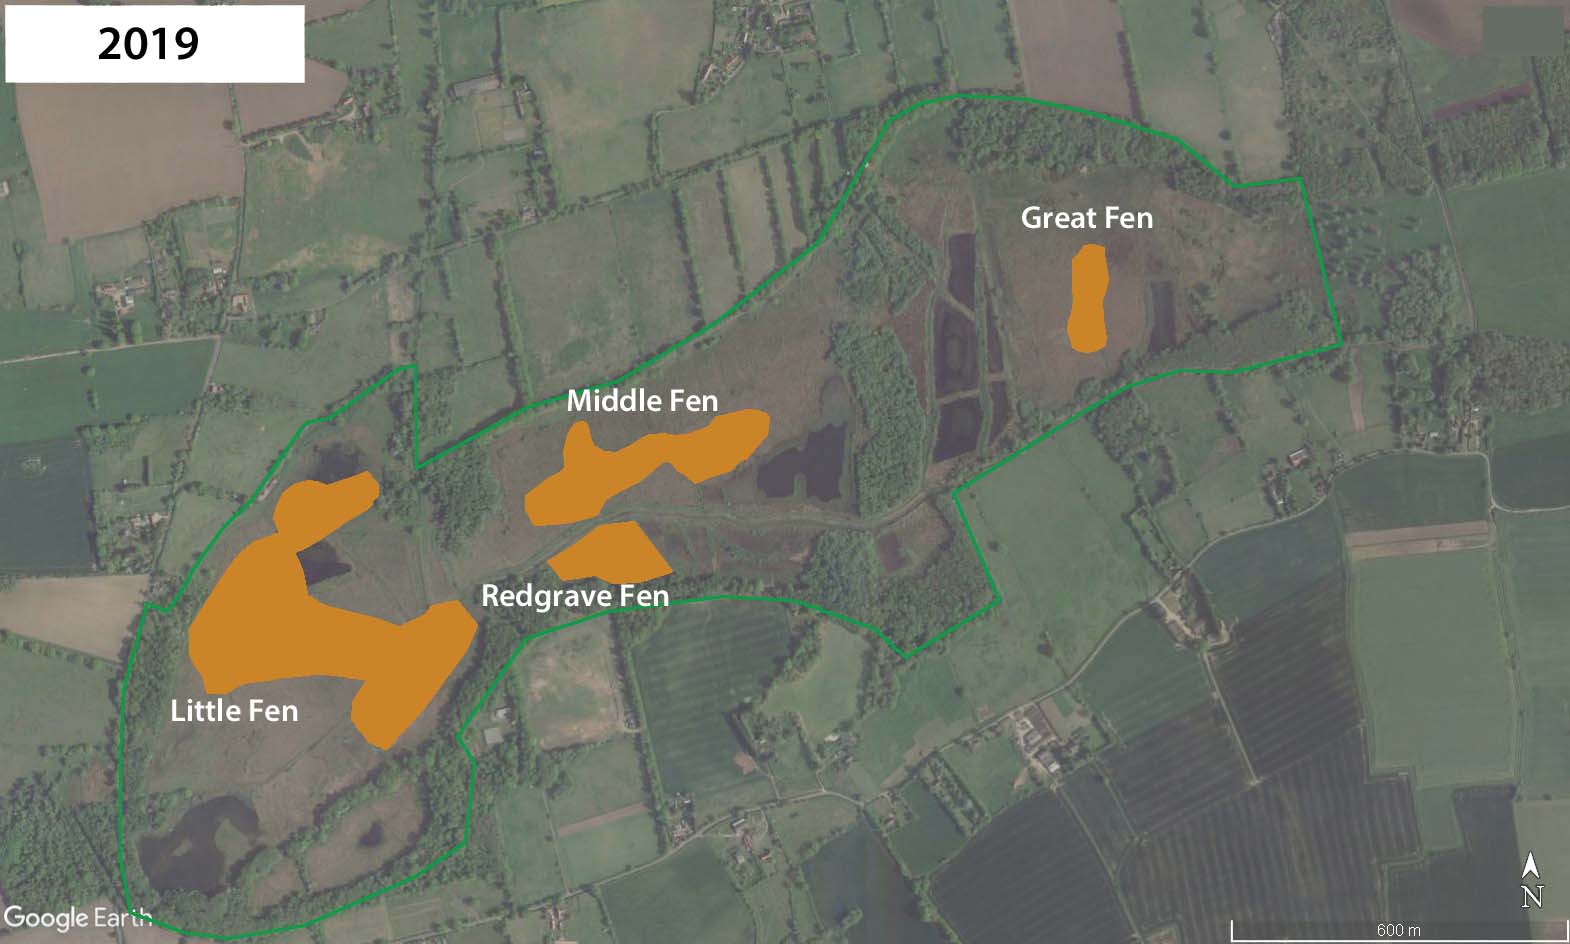 Distribution of D. plantarius at Redgrave and Lopham Fen by 2019